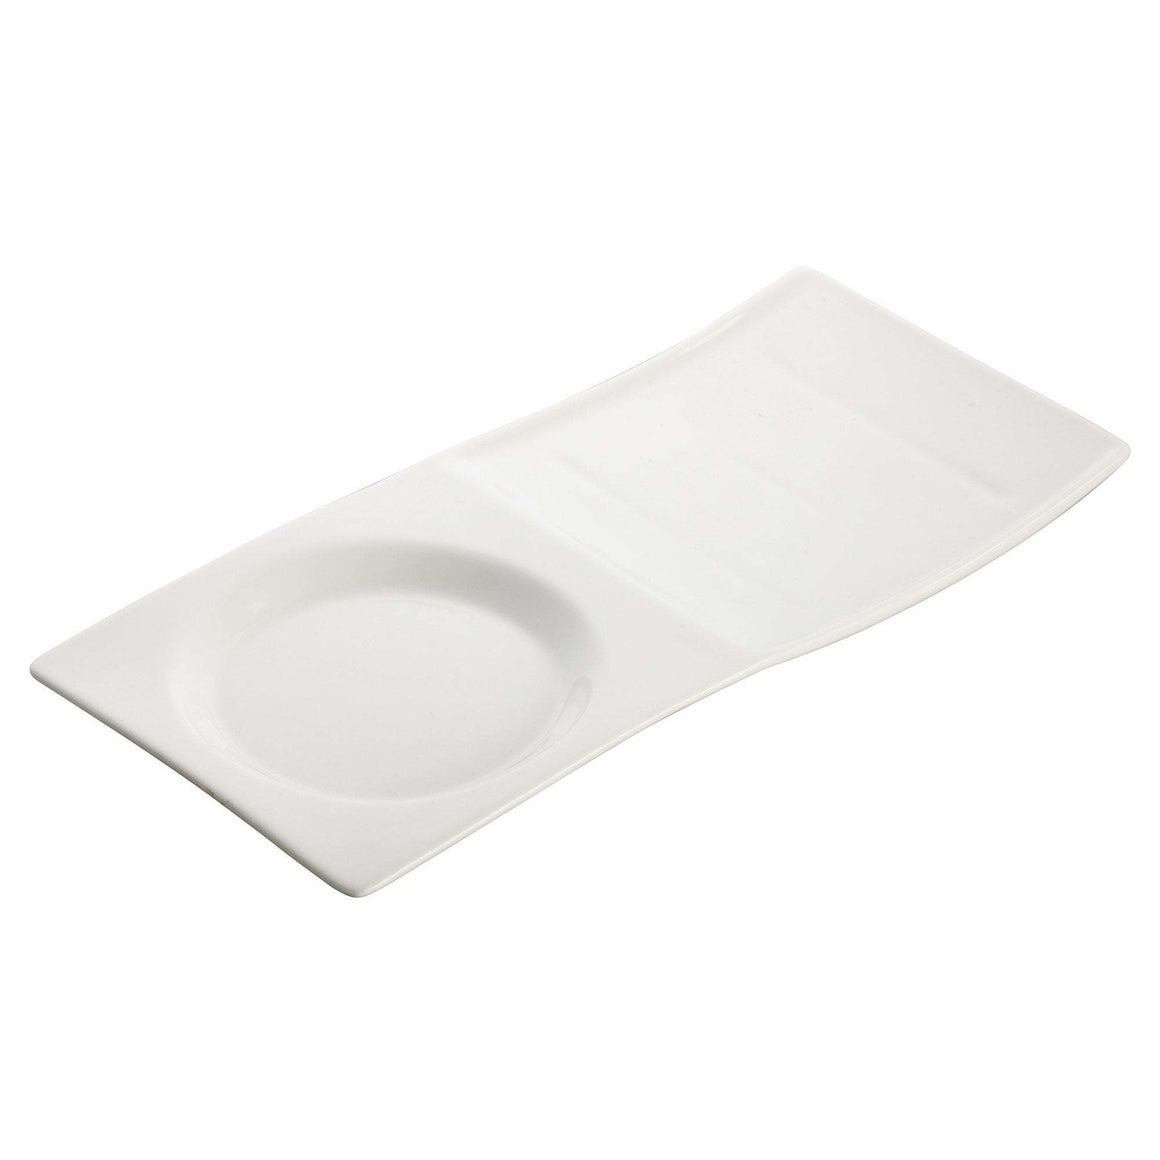 Winco - WDP012-102 - 10-1/2" x 5" Porcelain Tray, Bright White, 24 pcs/case - Dinnerware - Maltese & Co New and Used  restaurant Equipment 